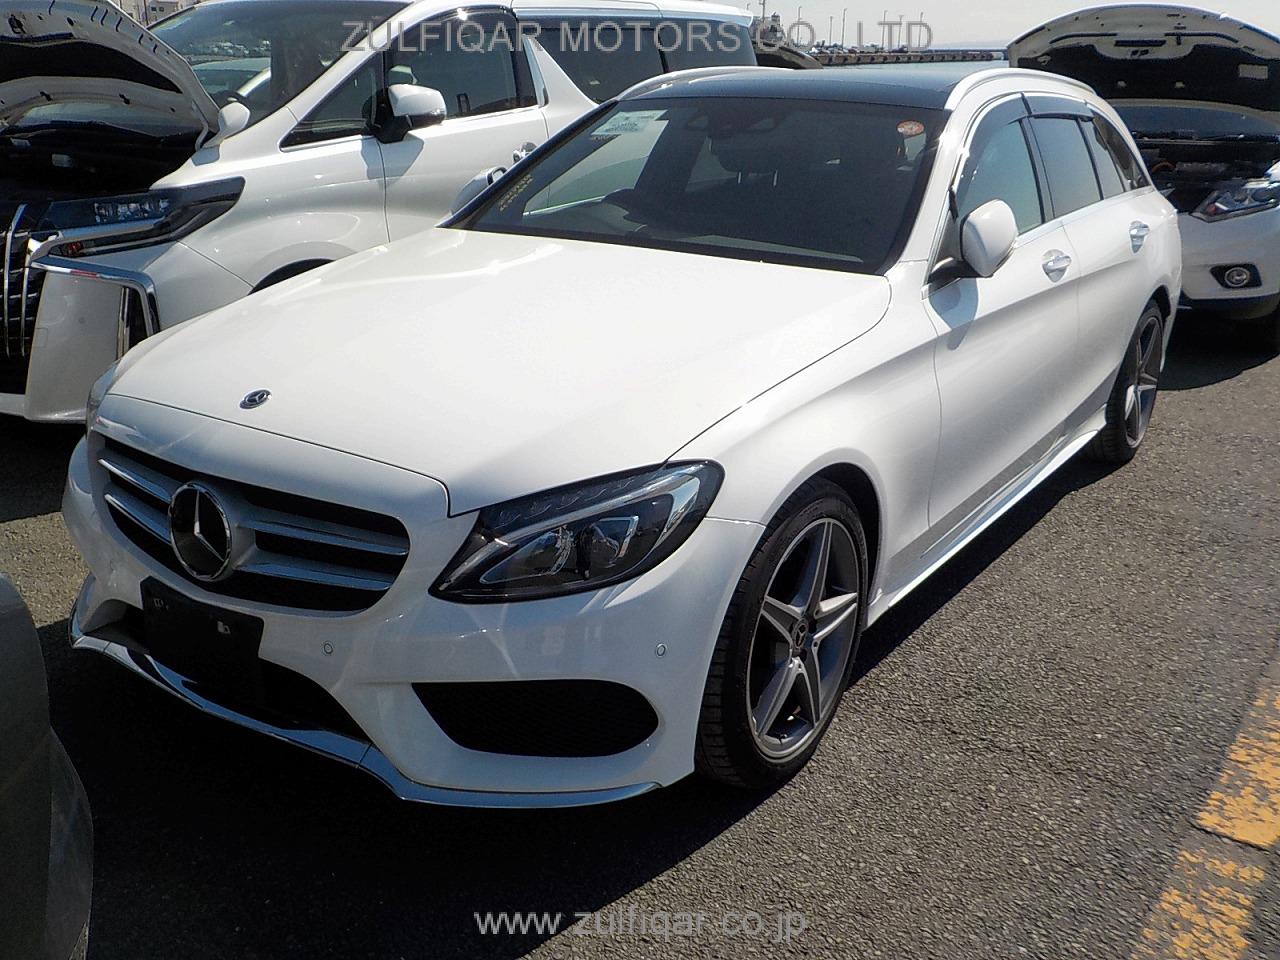 MERCEDES BENZ C CLASS STATION WAGON 2017 Image 65